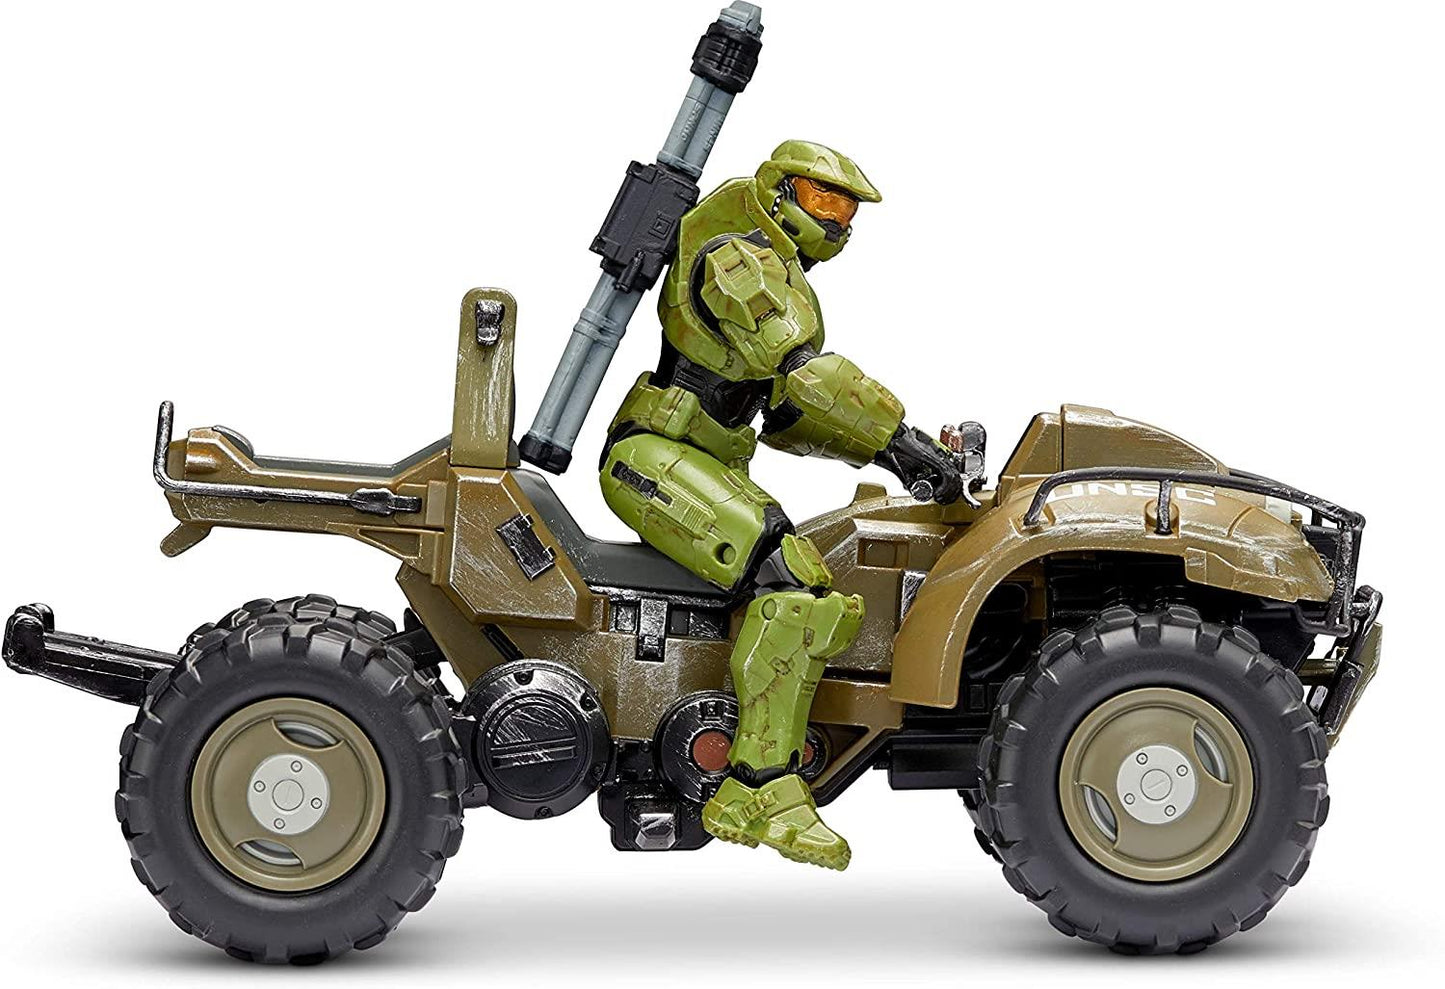 Mongoose with Master Chief 4" Figure and Vehicle World of Halo Infinite HLW0013